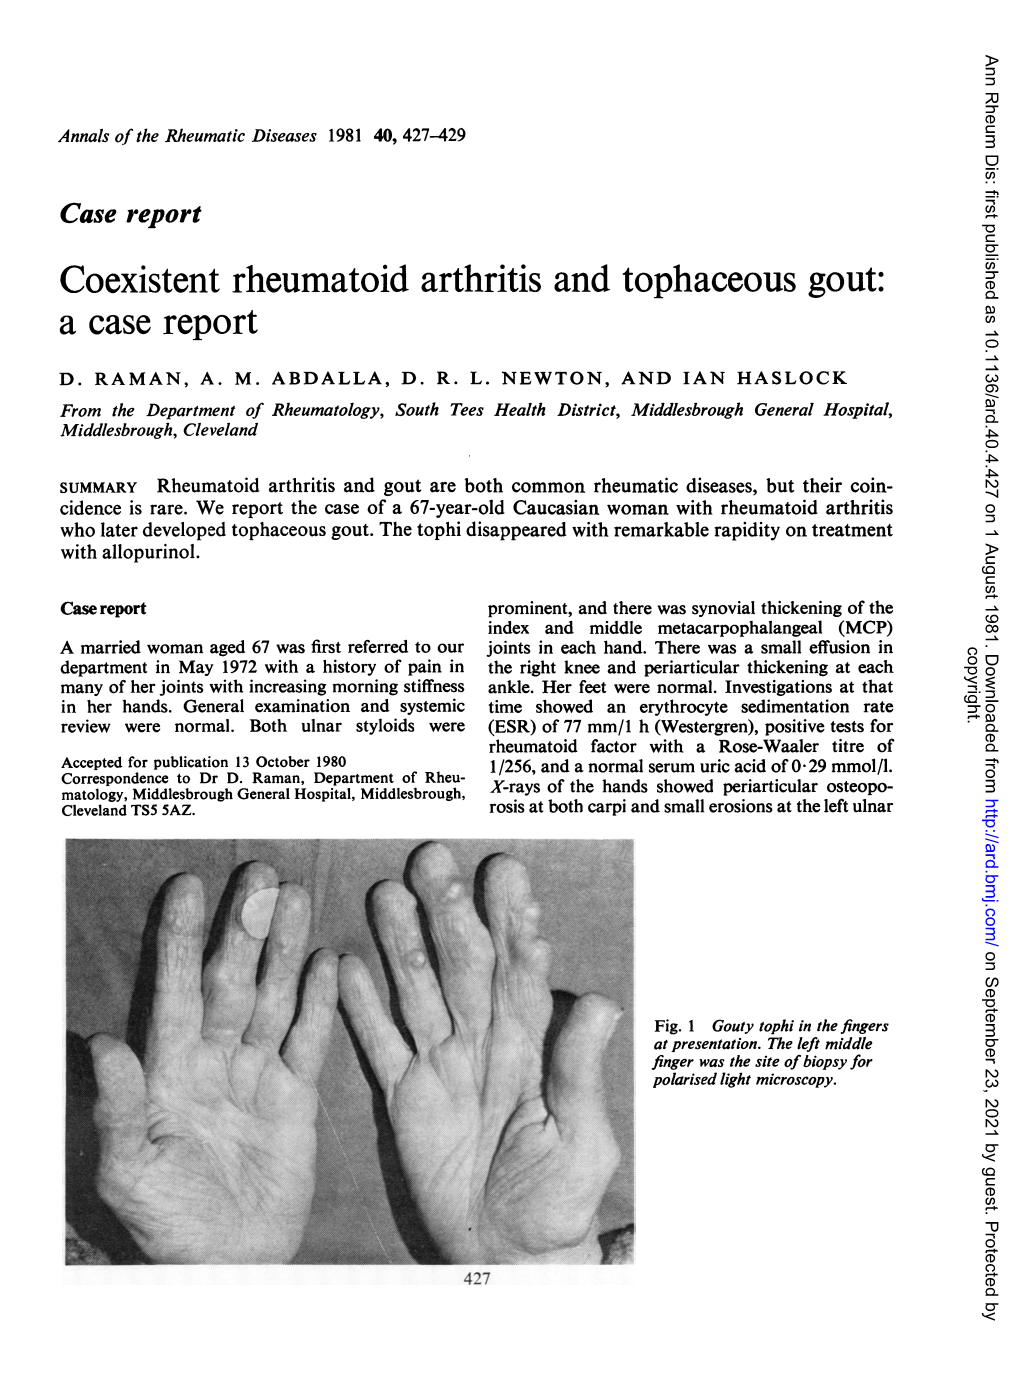 Coexistent Rheumatoid Arthritis and Tophaceous Gout: a Case Report